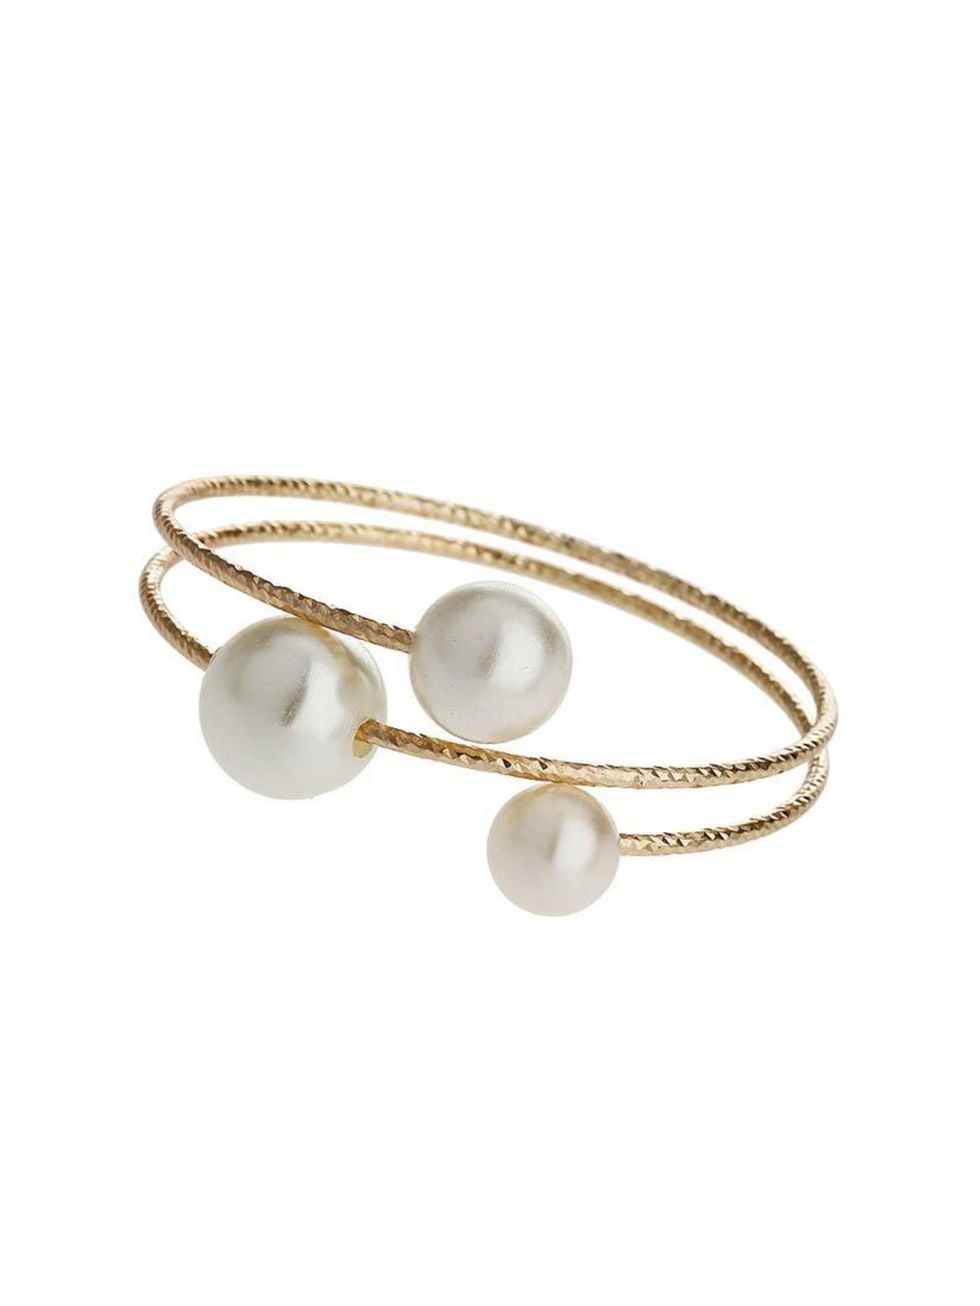 <p>Pair with a boxy navy jumper.</p>

<p><a href="http://www.topshop.com/en/tsuk/product/bags-accessories-1702216/jewellery-469/triple-cream-stone-bangle-3246892?bi=401&ps=200" target="_blank">Freedom at Topshop</a> bangle, £7.50</p>